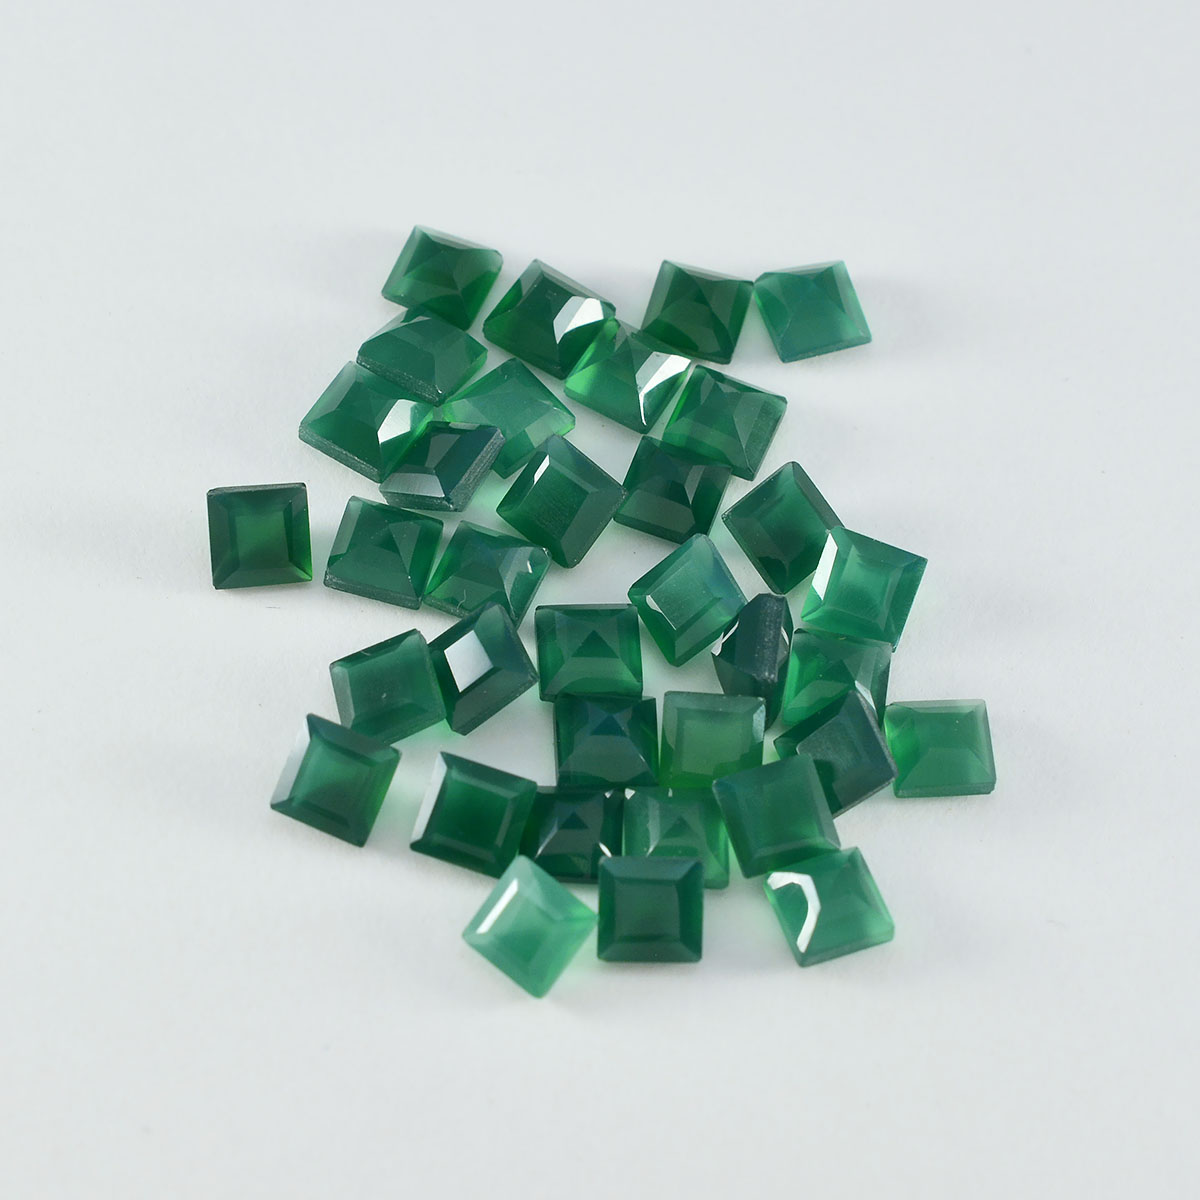 Riyogems 1PC Real Green Onyx Faceted 5X5 mm Square Shape good-looking Quality Loose Gemstone